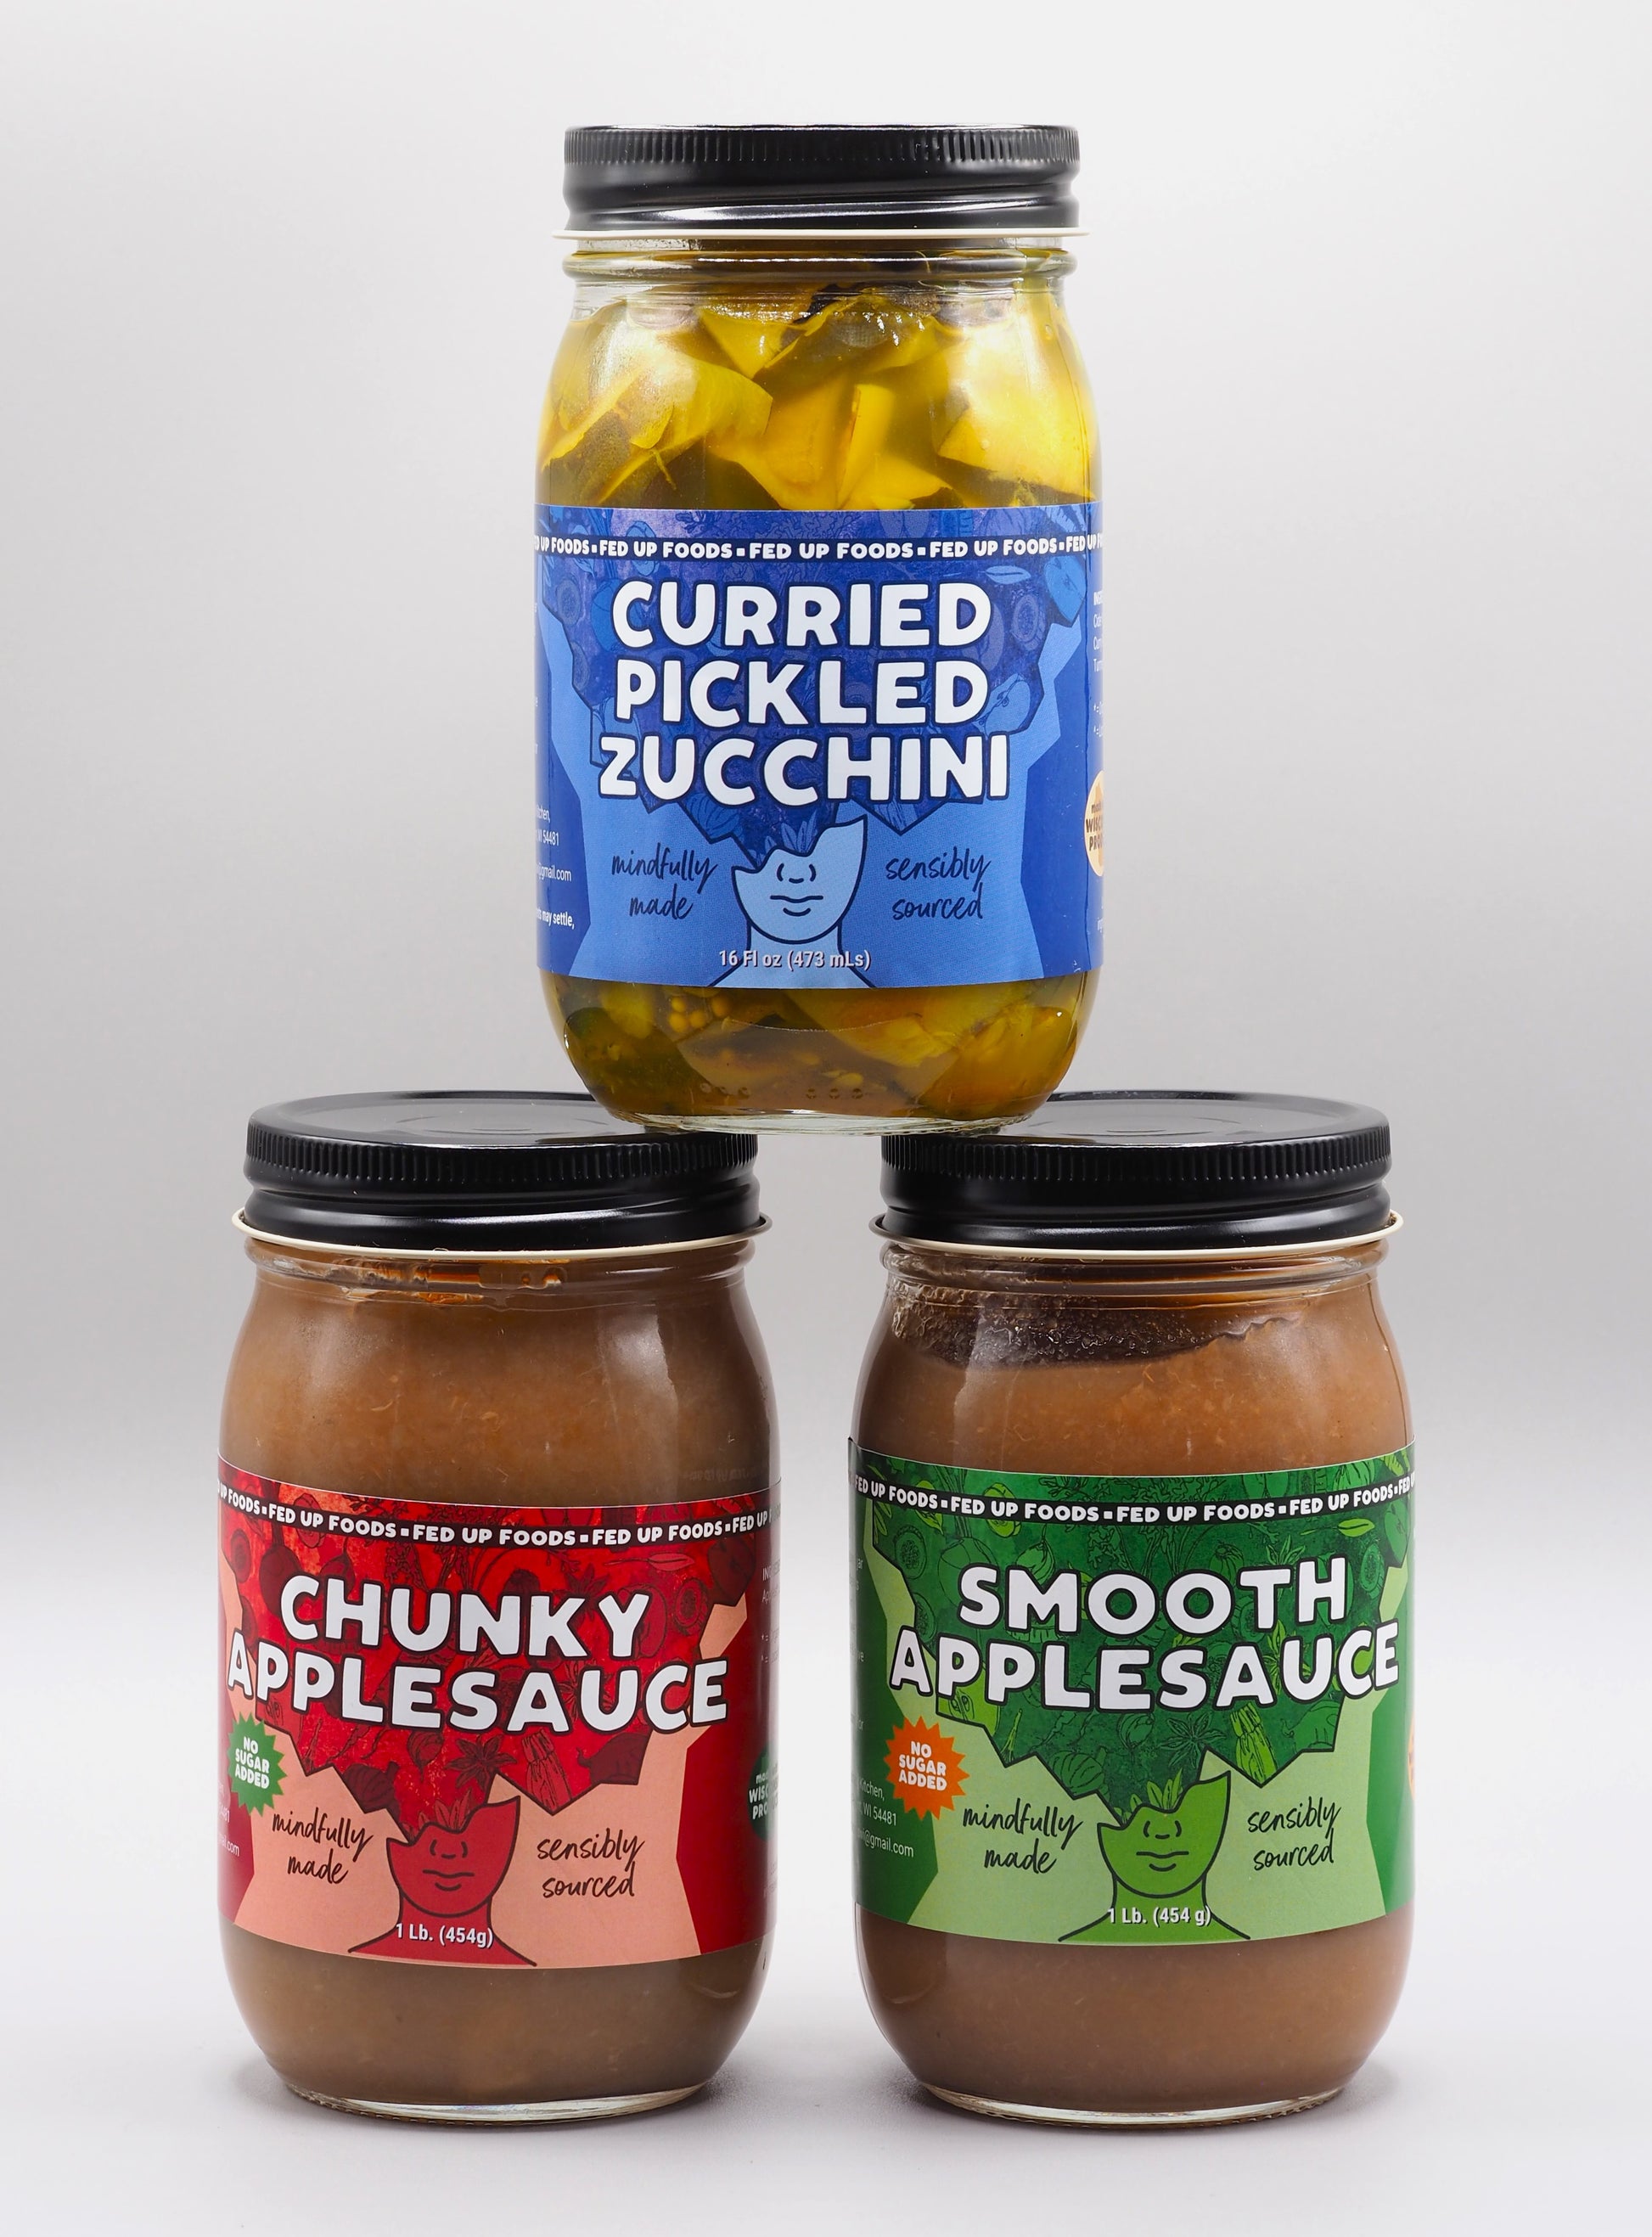 Fed Up Foods Curried Pickled Zucchini chunky and smooth applesauces in a 3 pack variety pack